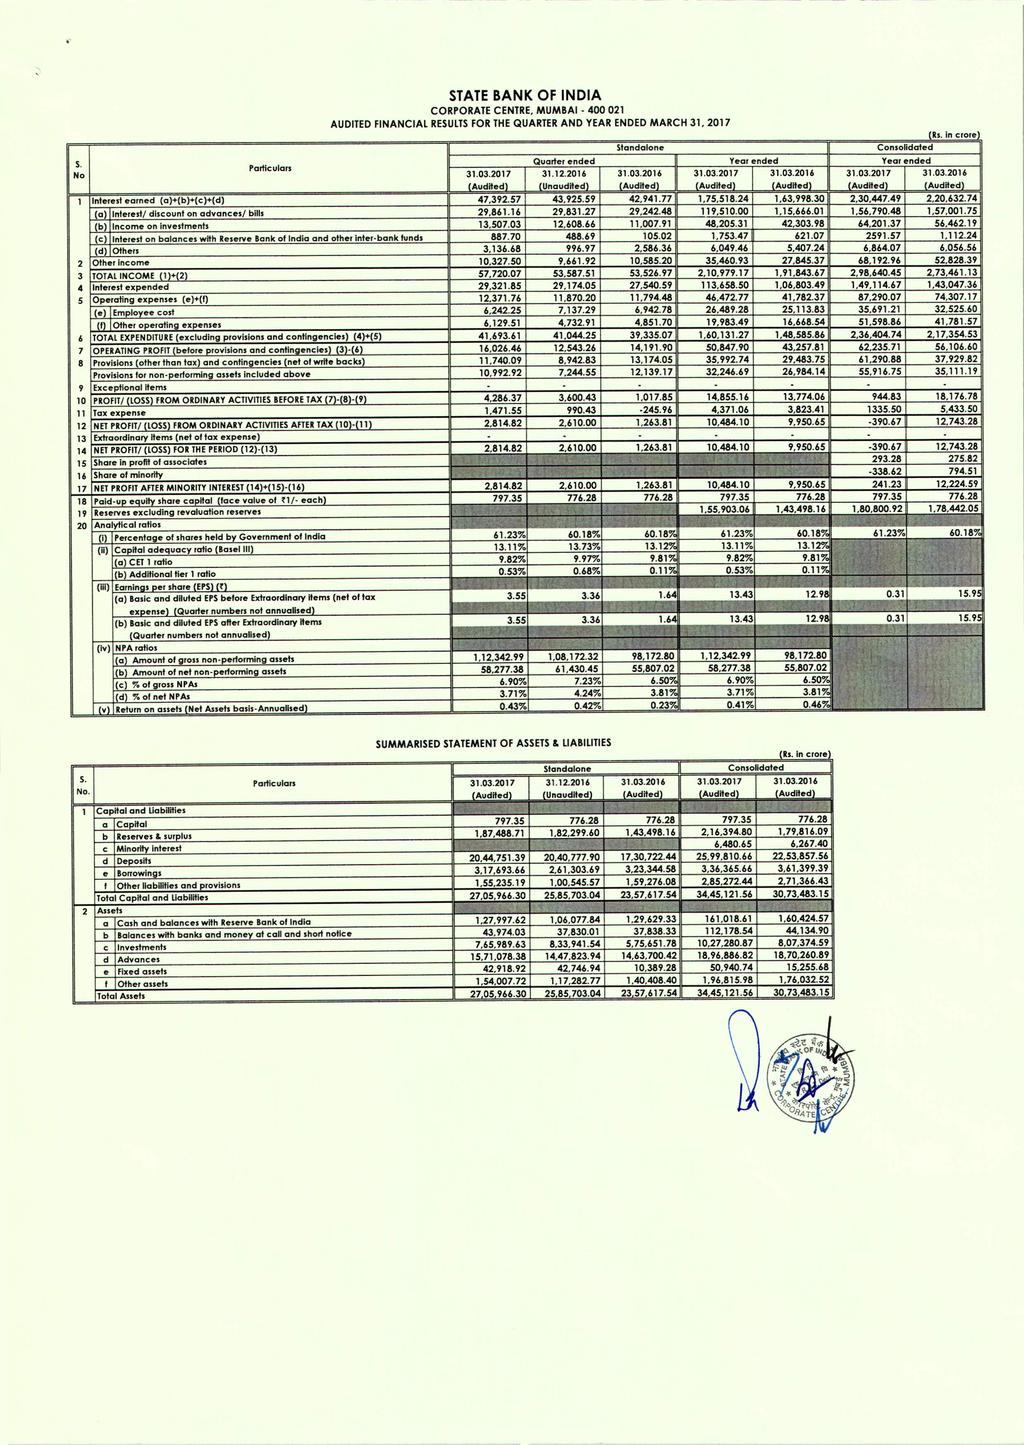 STATE BANK OF INDIA CORPORATE CENTRE, MUMBAI - 400021 AUDITED FINANCIAL RESULTSFOR